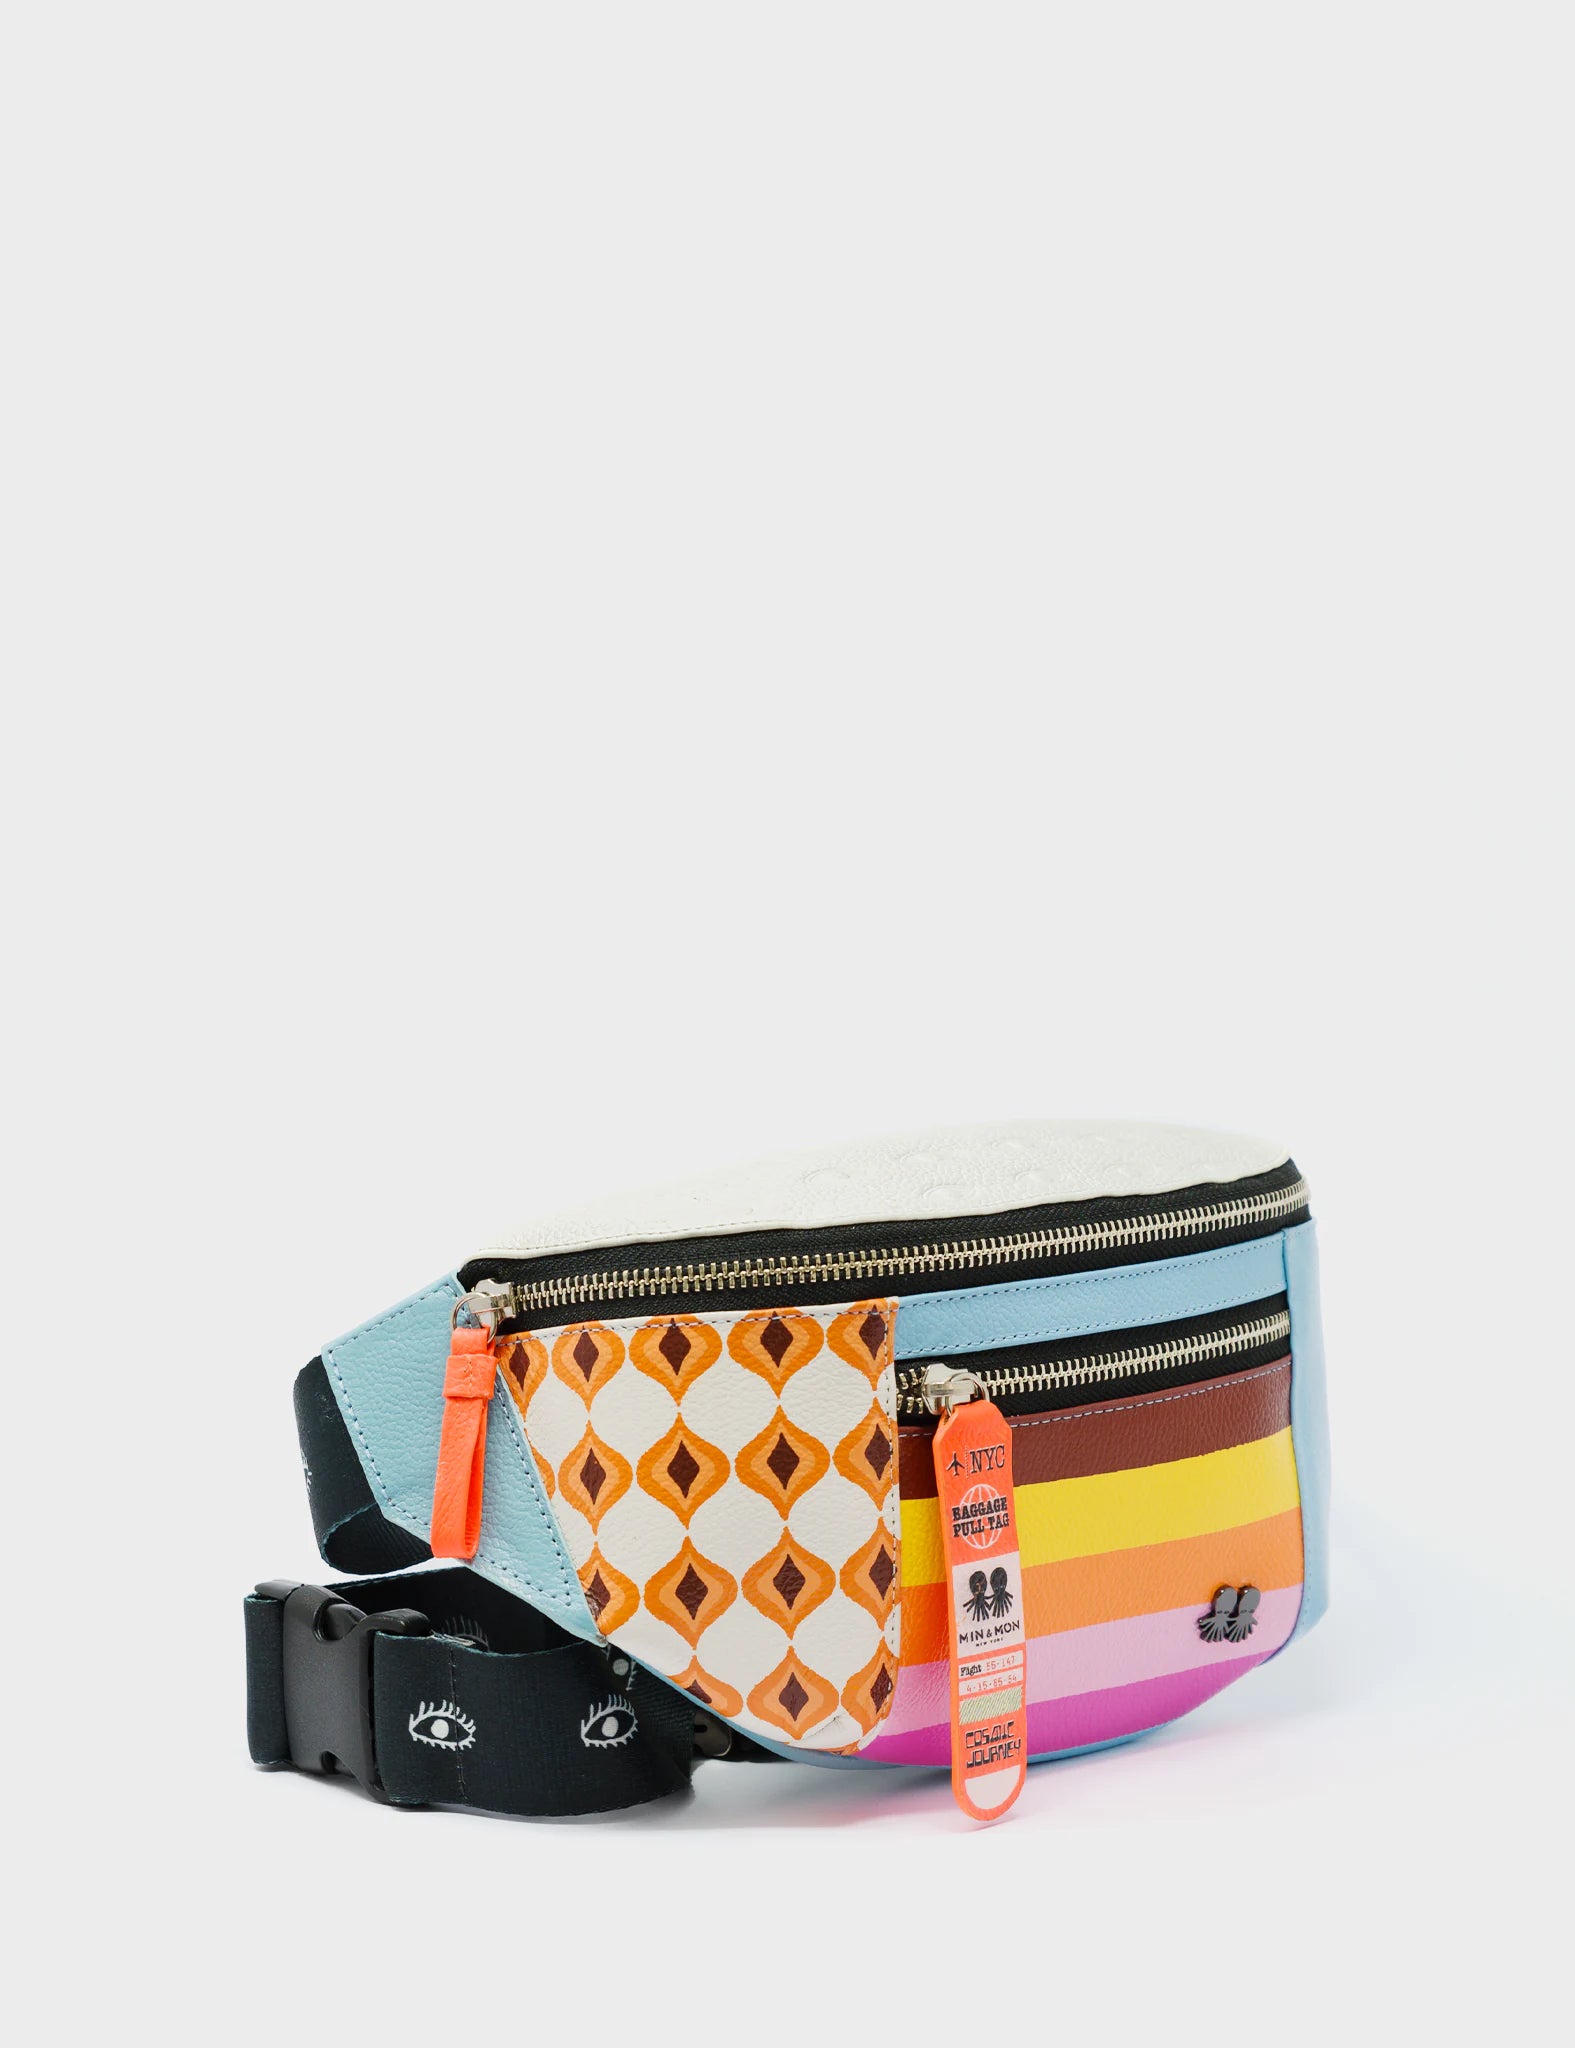 Bag Fanny Pack Cream And Blue Leather - Eyes Pattern Debossed